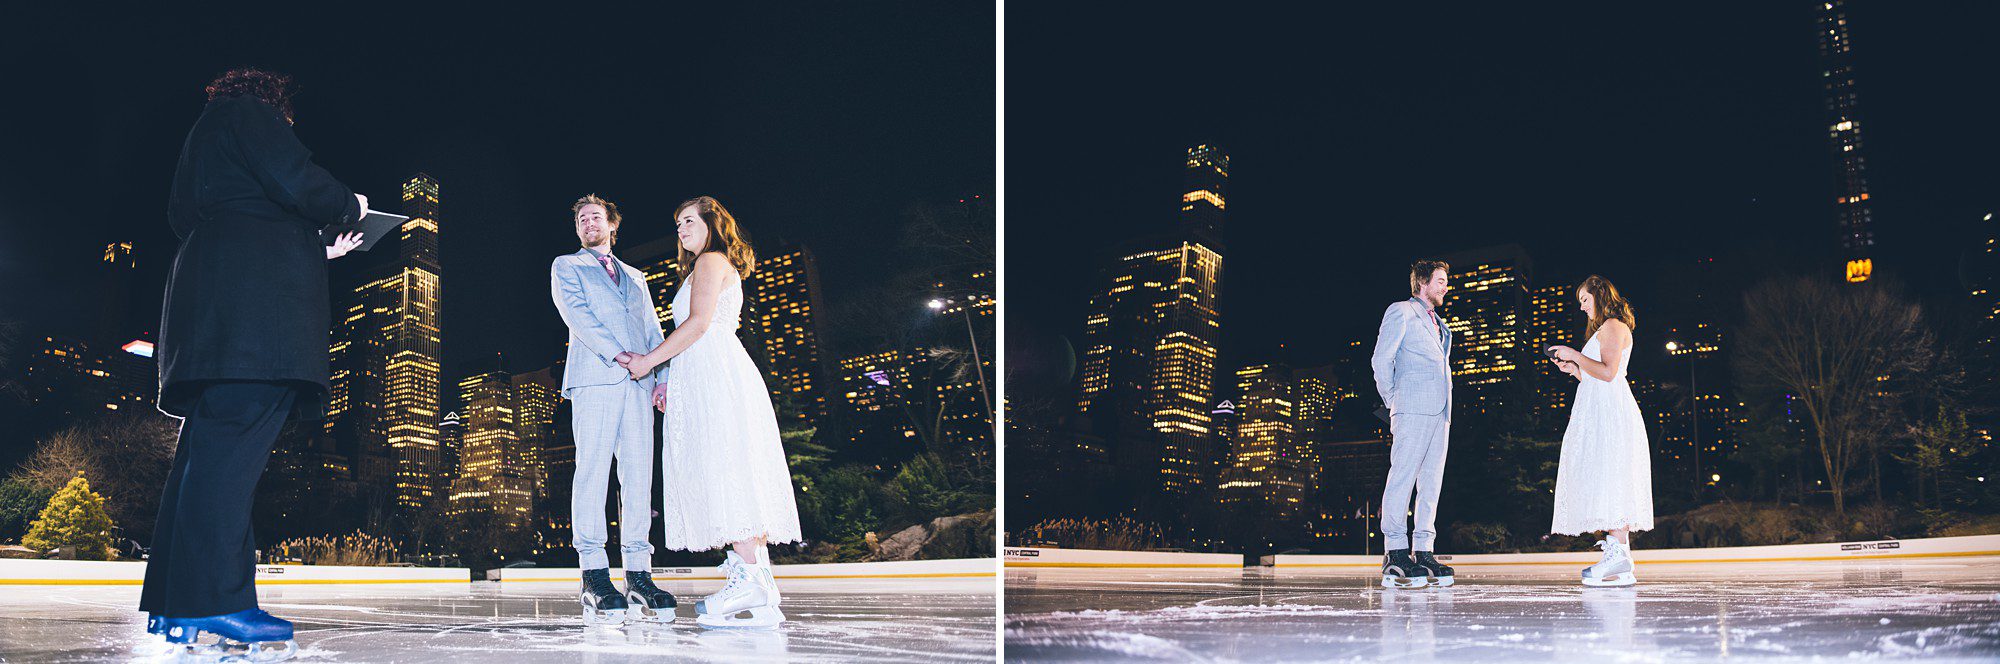 Wollman Rink Best places to get married in Central Park